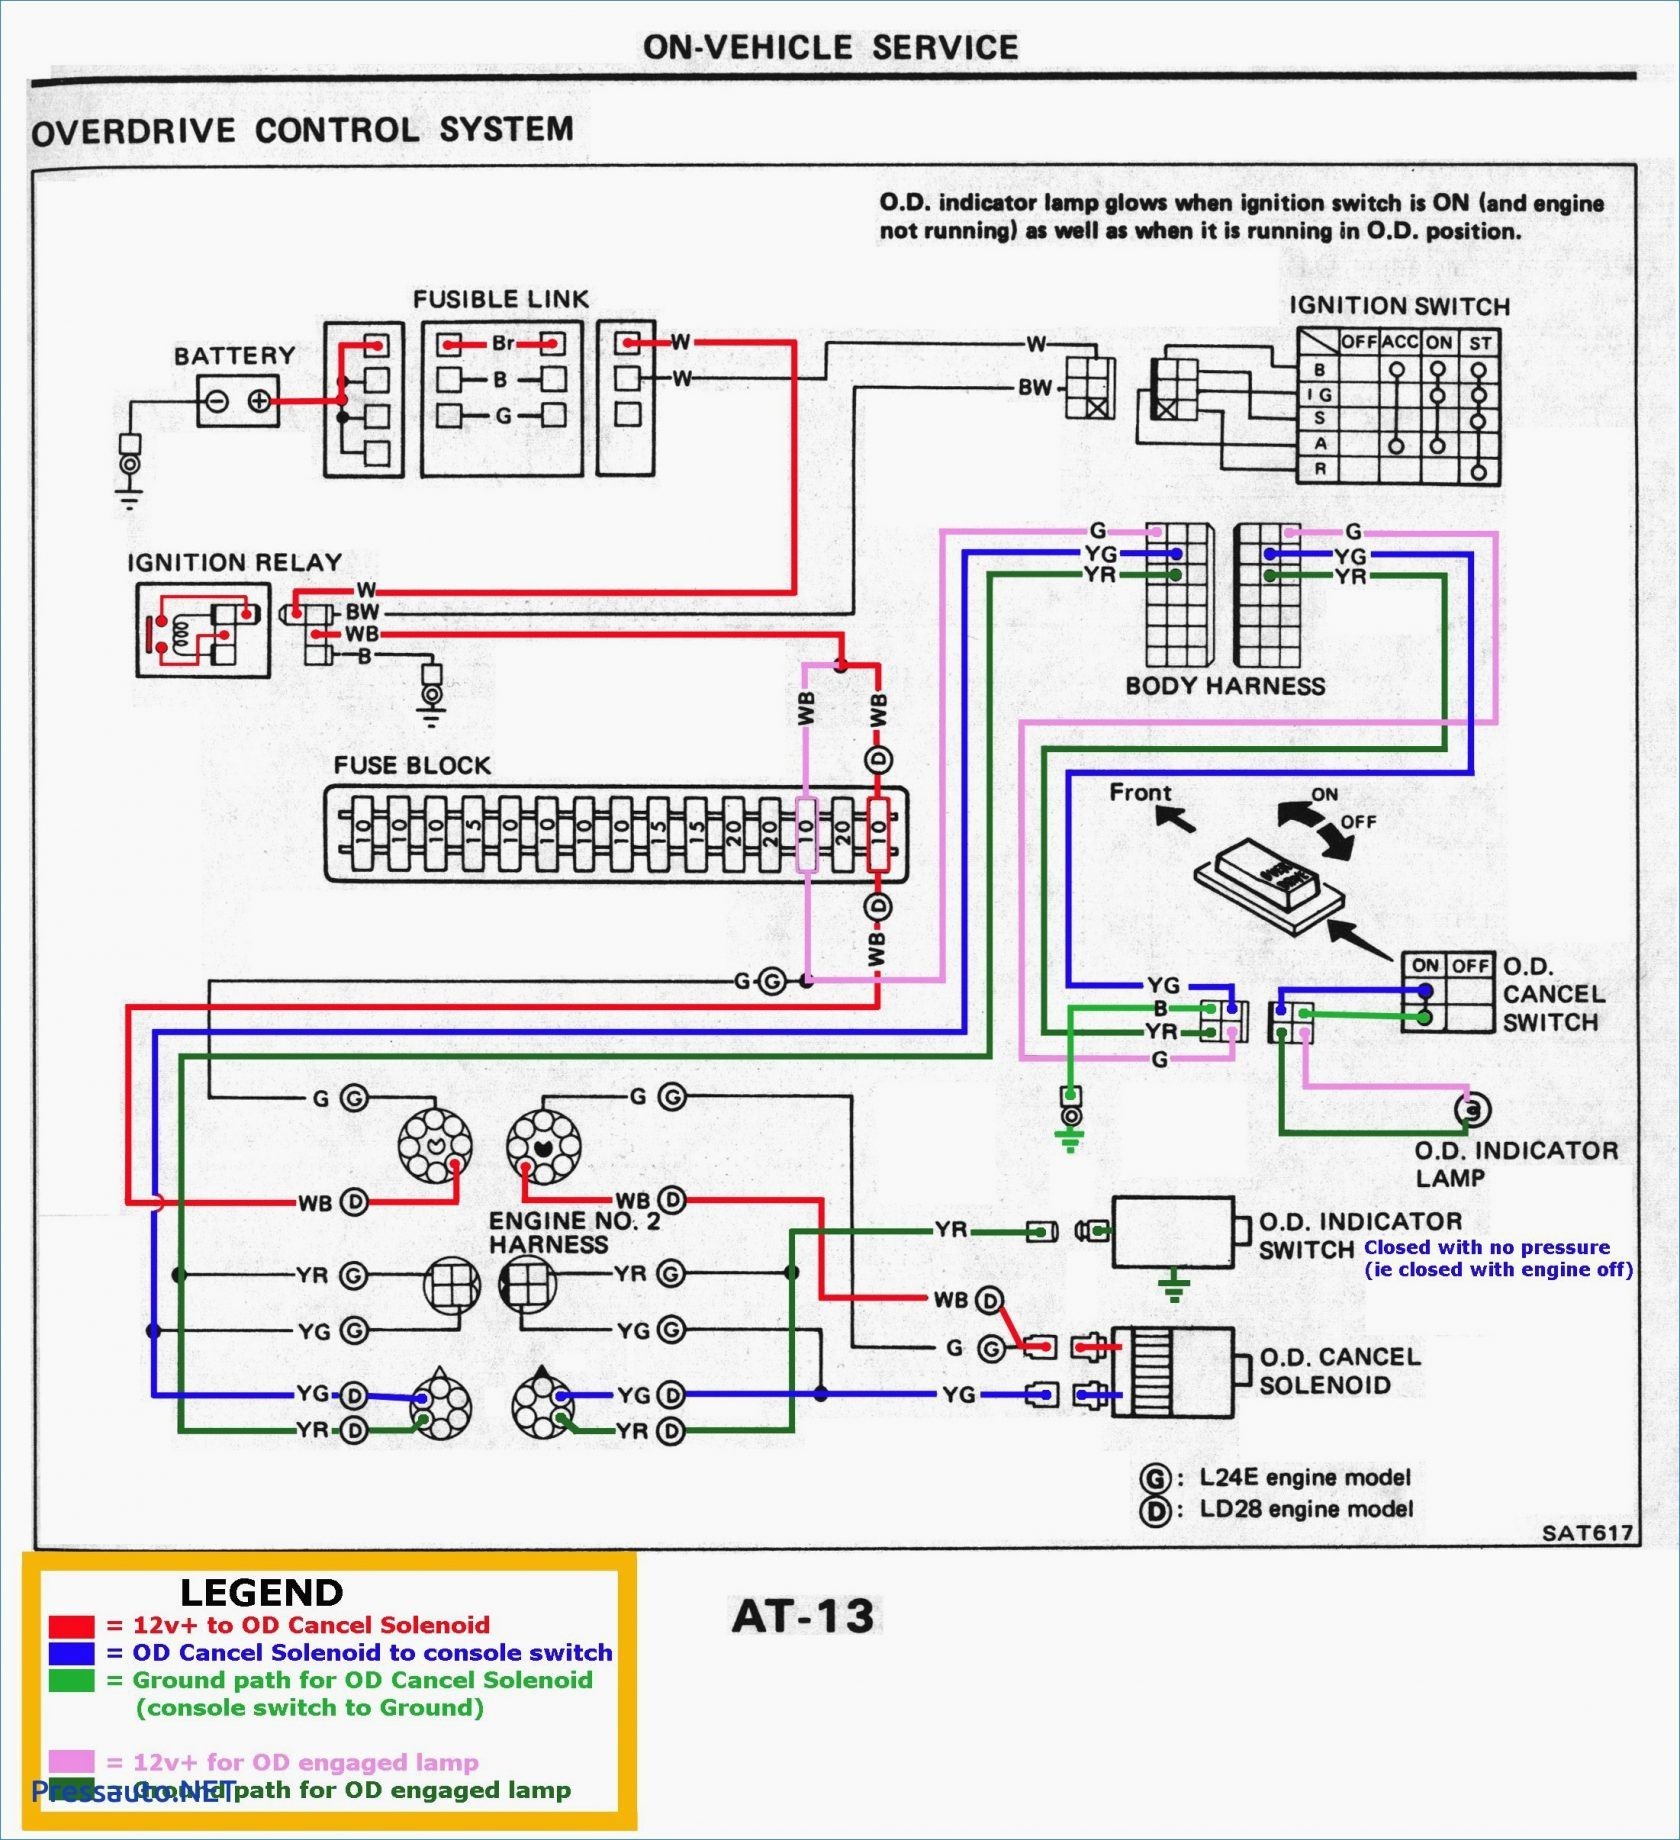 Diagram Of Car Gearbox Wiring Diagram Auto Start New Engine Start button Wiring Diagram Of Diagram Of Car Gearbox